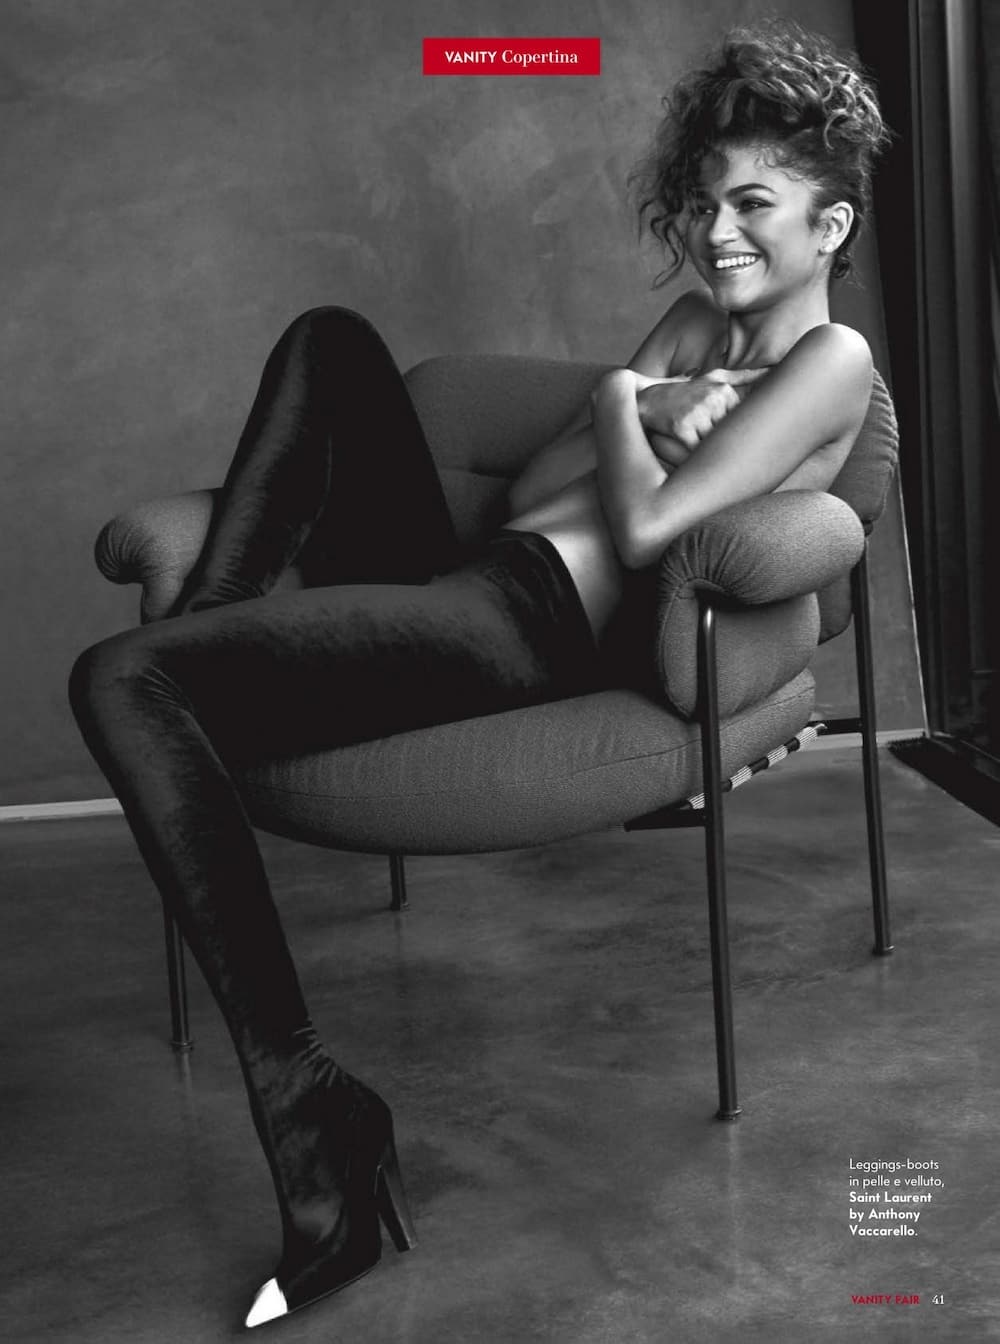 Hot Zendaya Coleman posed topless wearing just black velvet pant in the photoshoot for the Vanity Fair Italia magazine’s 13 October 2021 Edition.